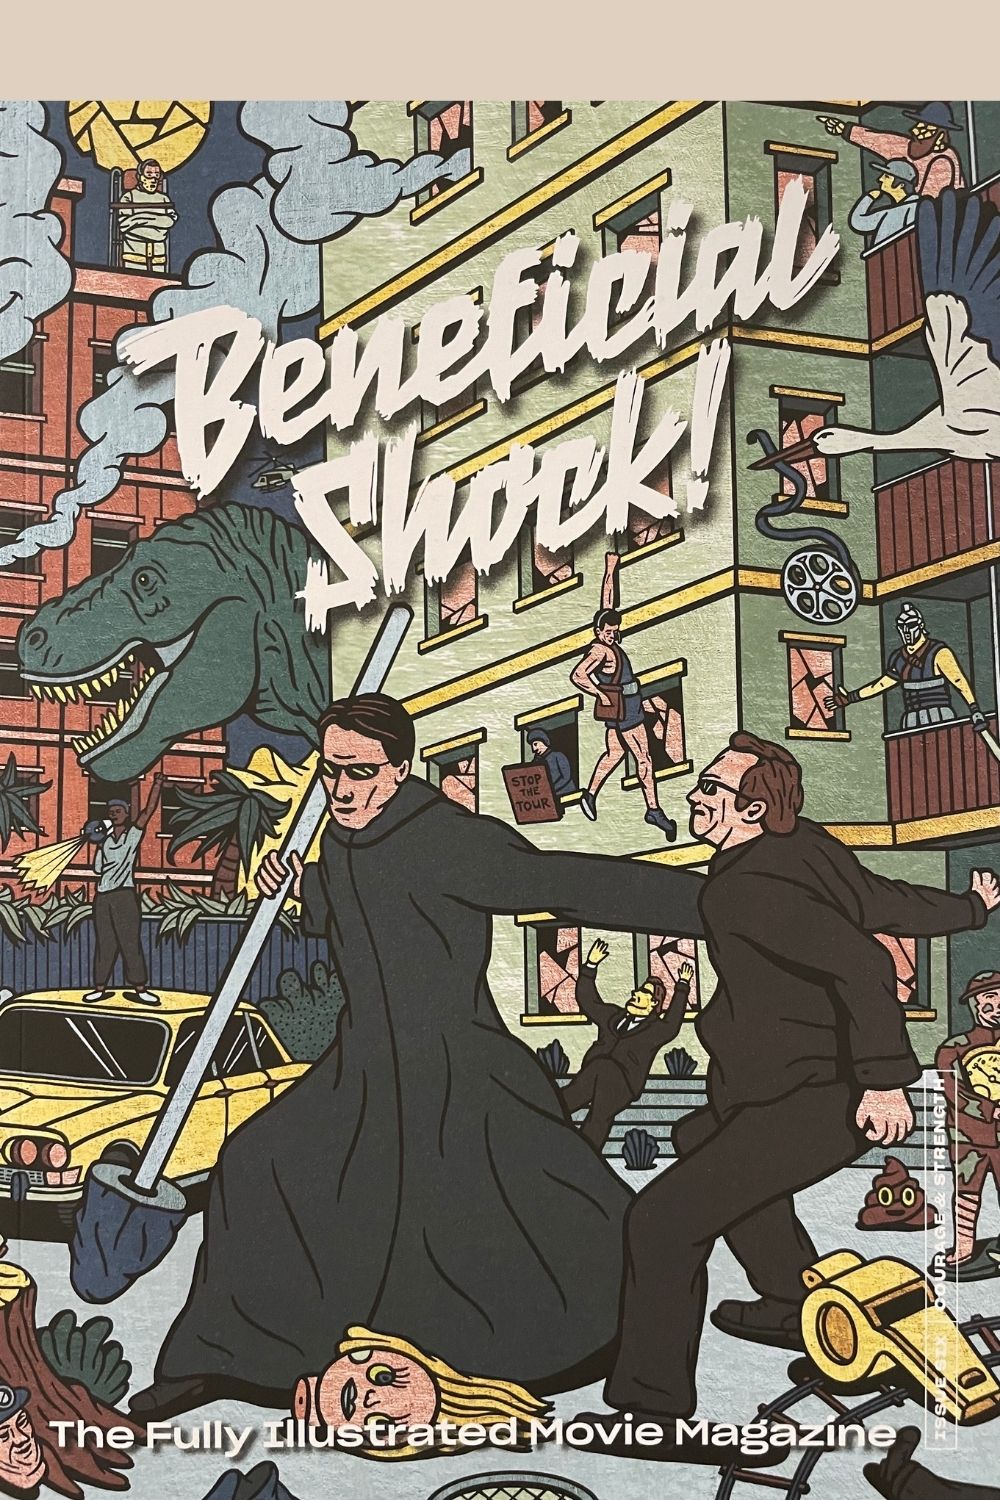 Beneficial Shock! Magazine Issue 6